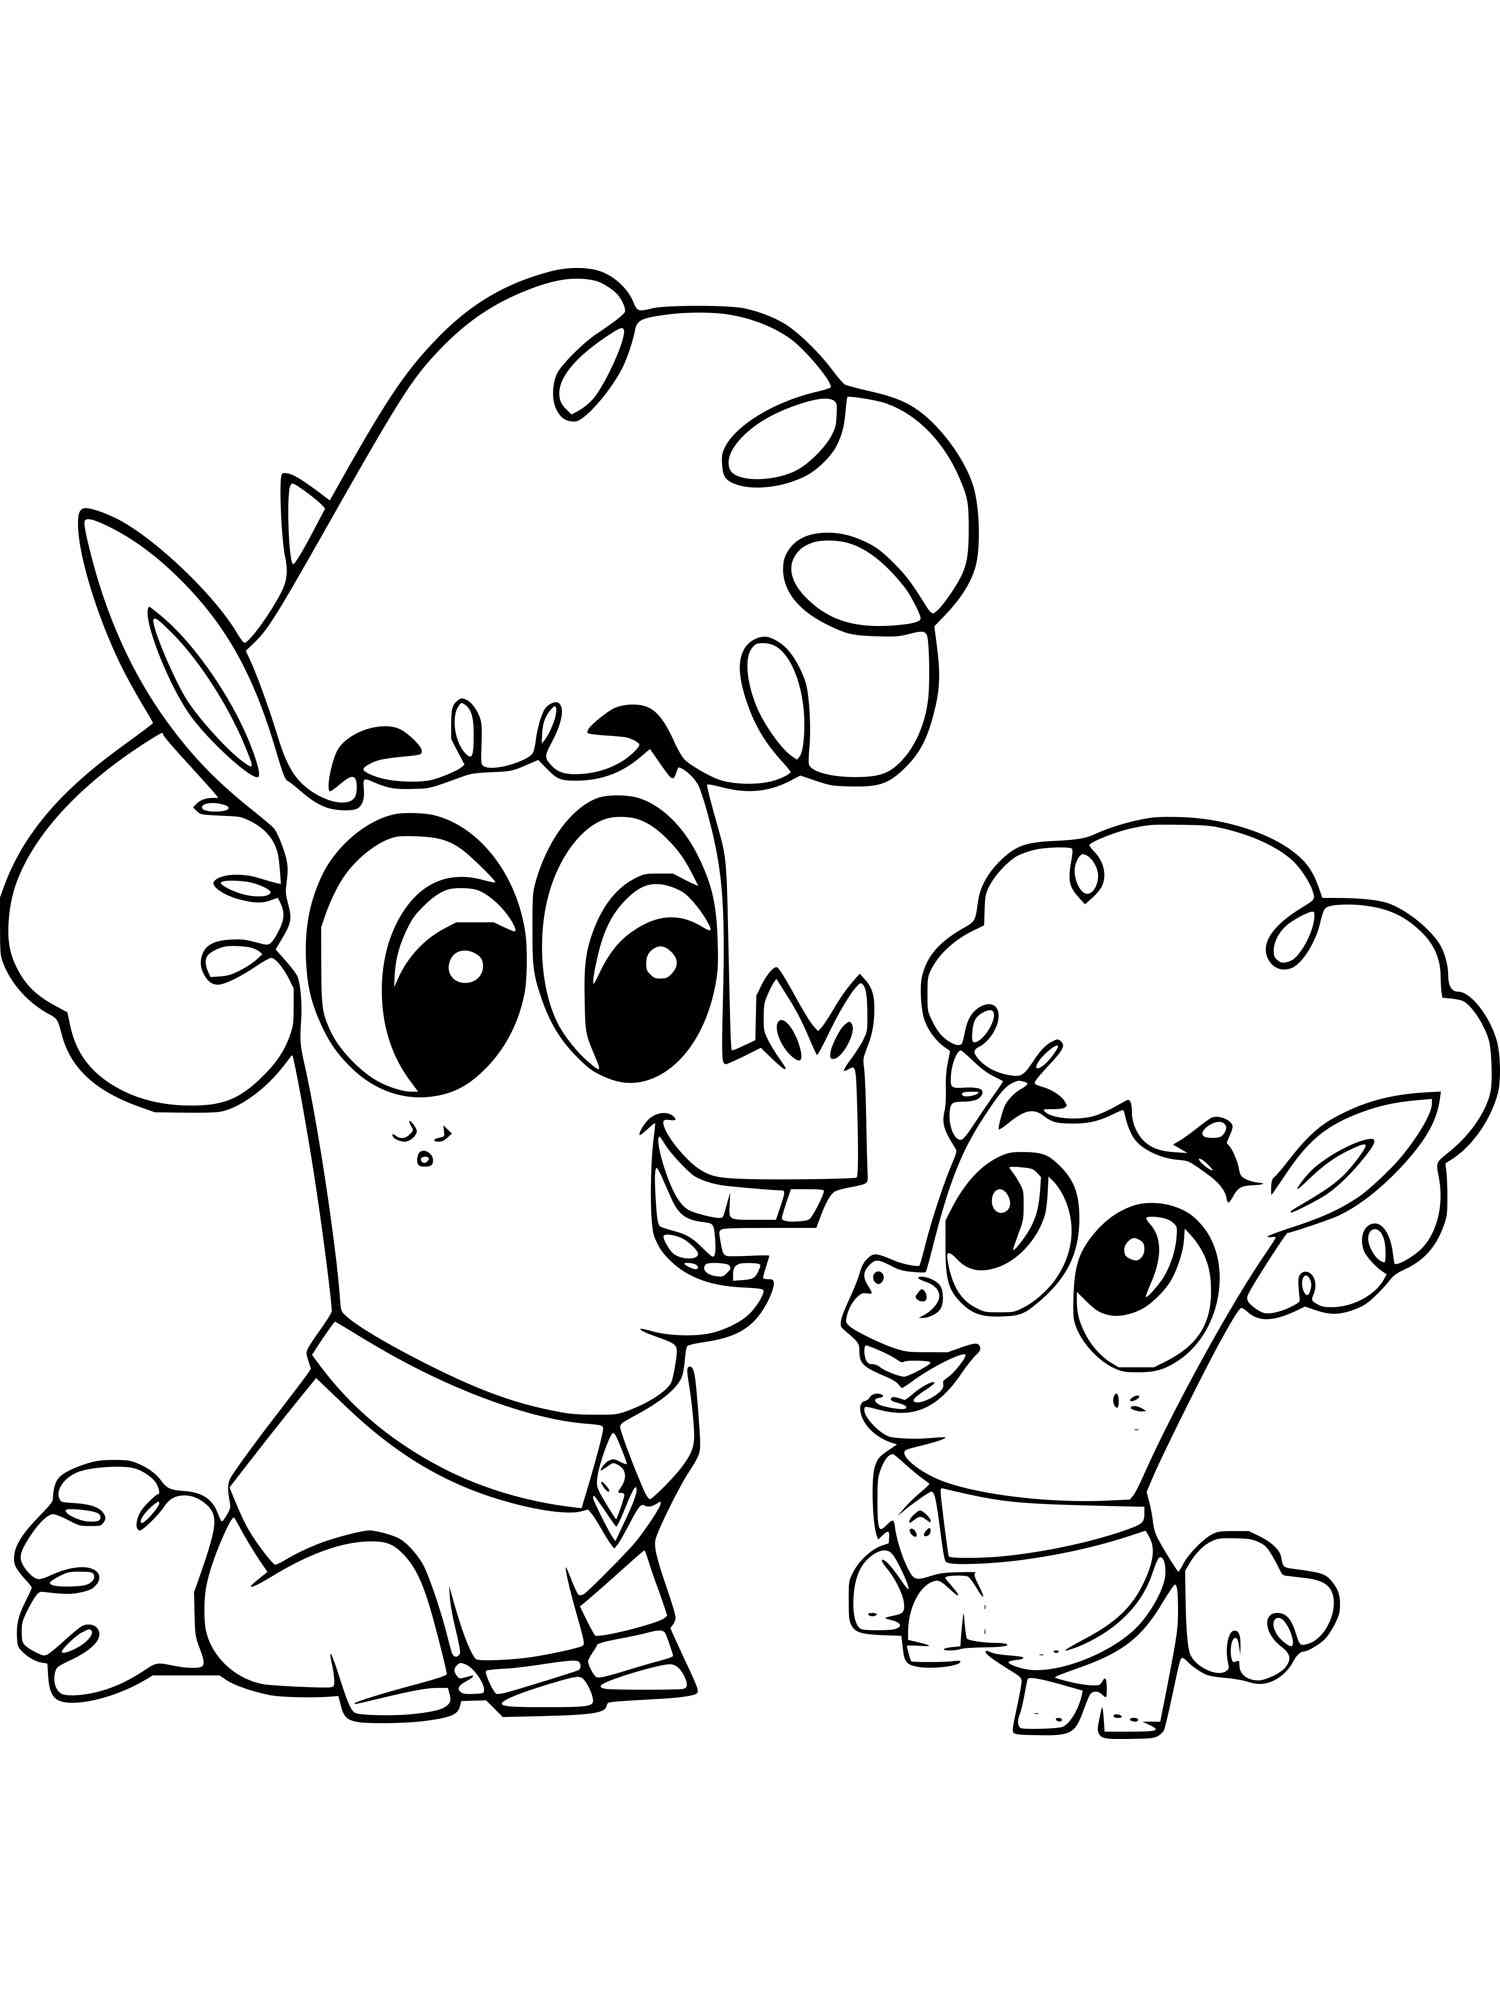 Corn and Peg 4 coloring page